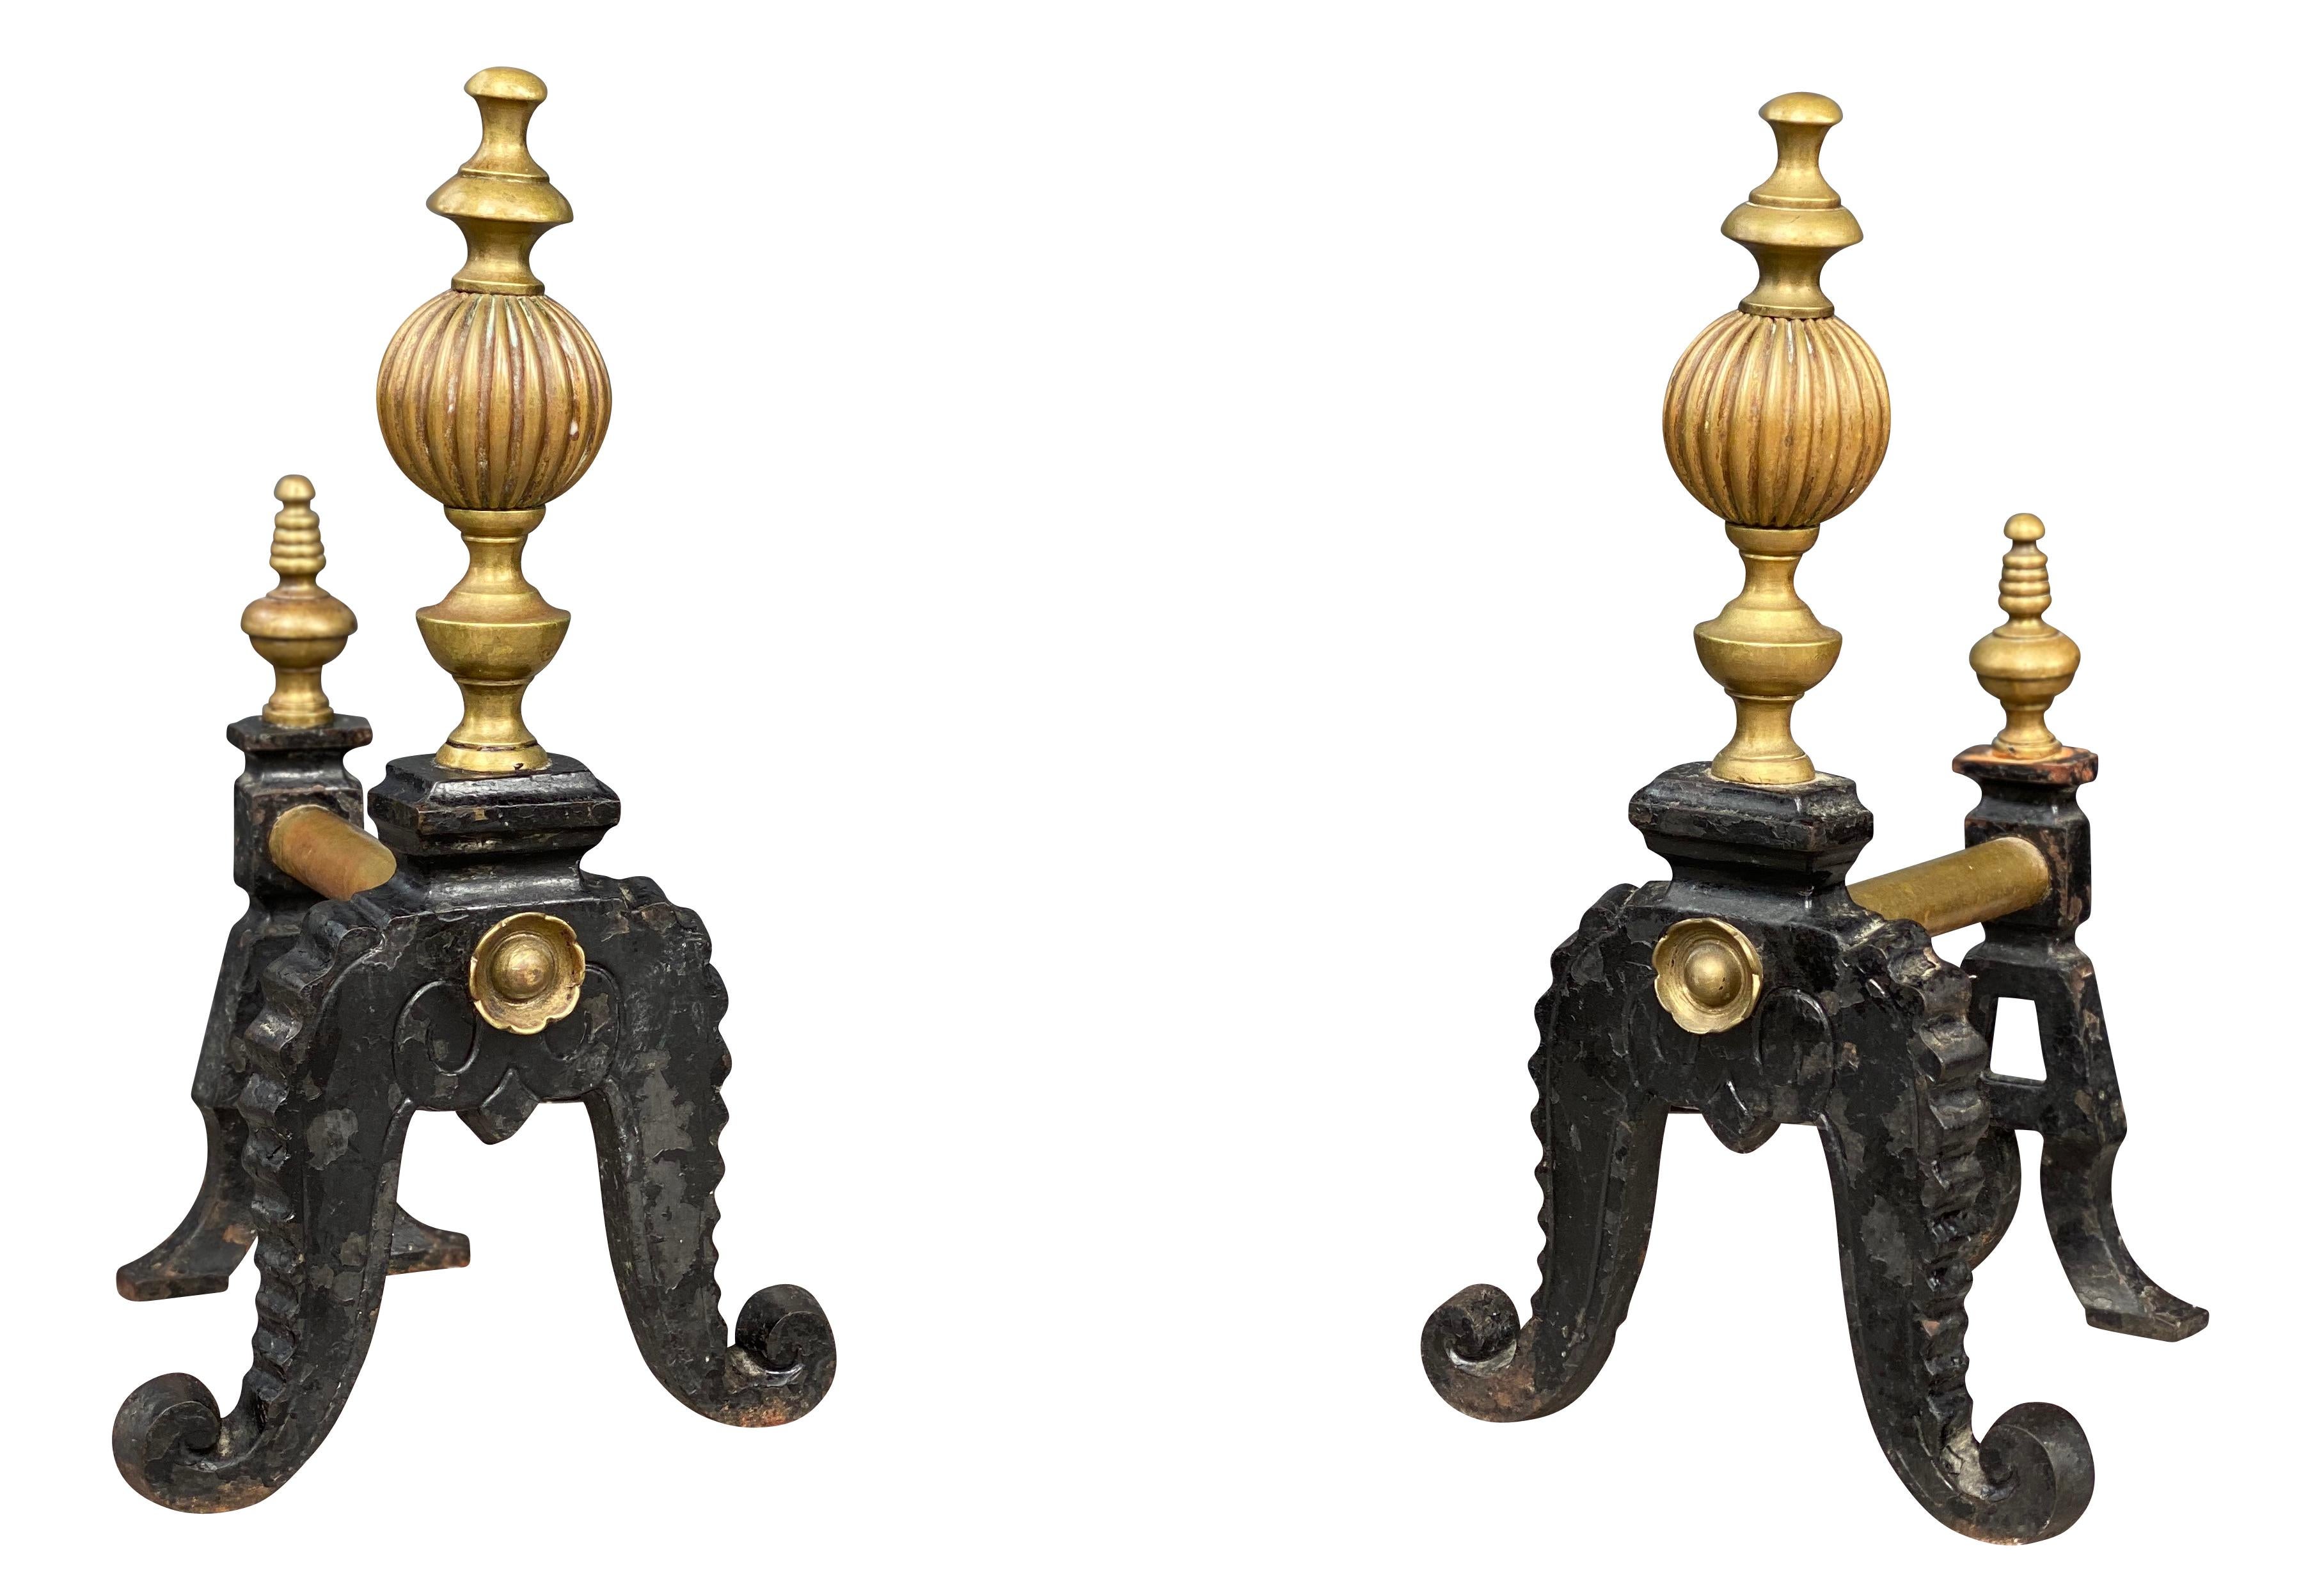 Each with urn finials and octopus legs.